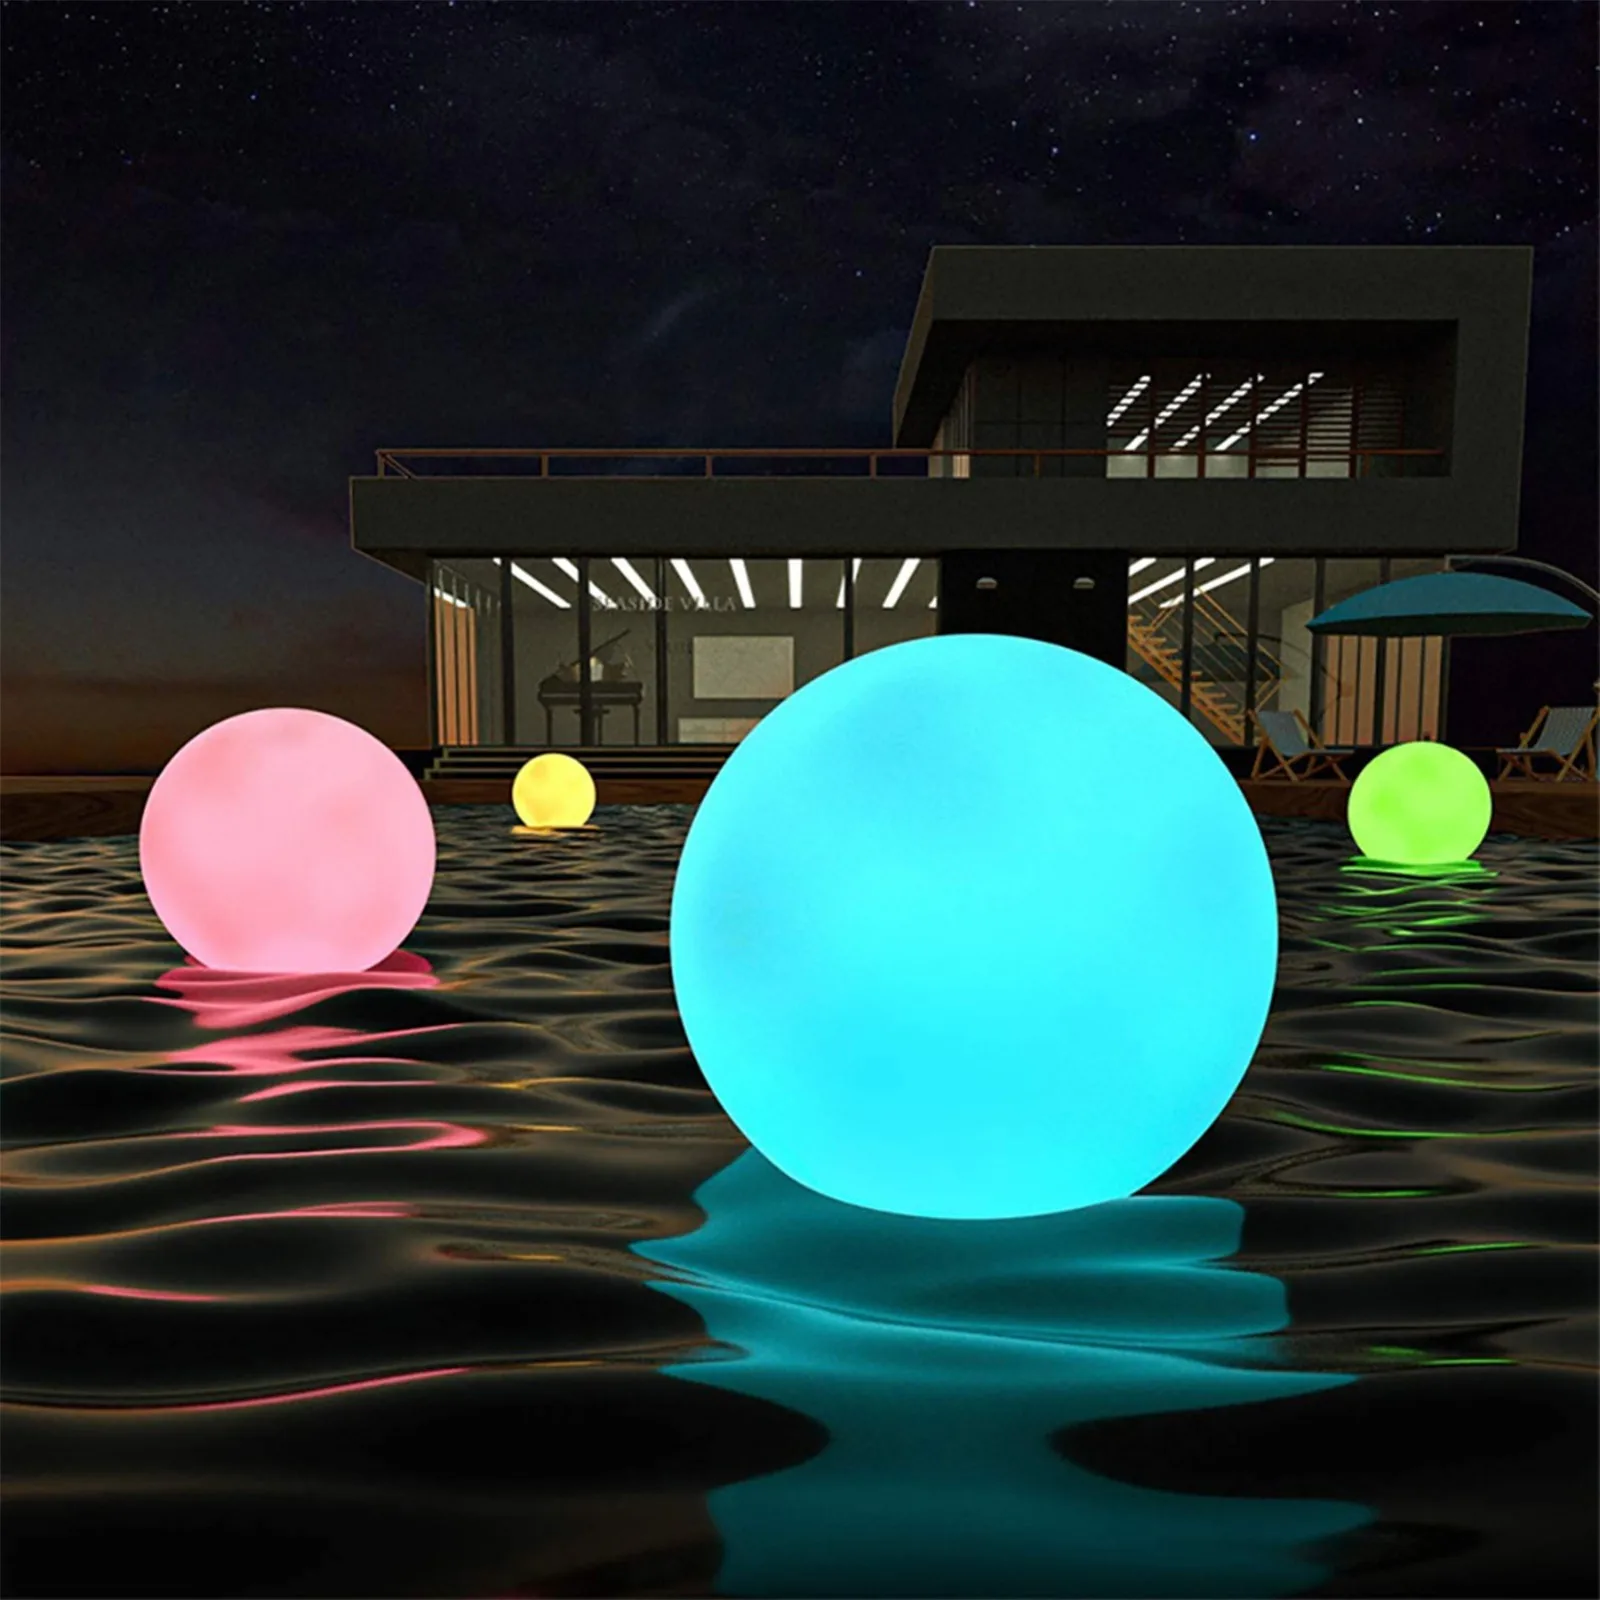 Water Toy Pool Accessories for Kids Adults Glowing Outdoor Beach Pool Party Games Patio Garden Backyard Decor 16 Colors 4 Lighting Modes LED Beach Ball 16 Inflatable Pool Toy with Remote 